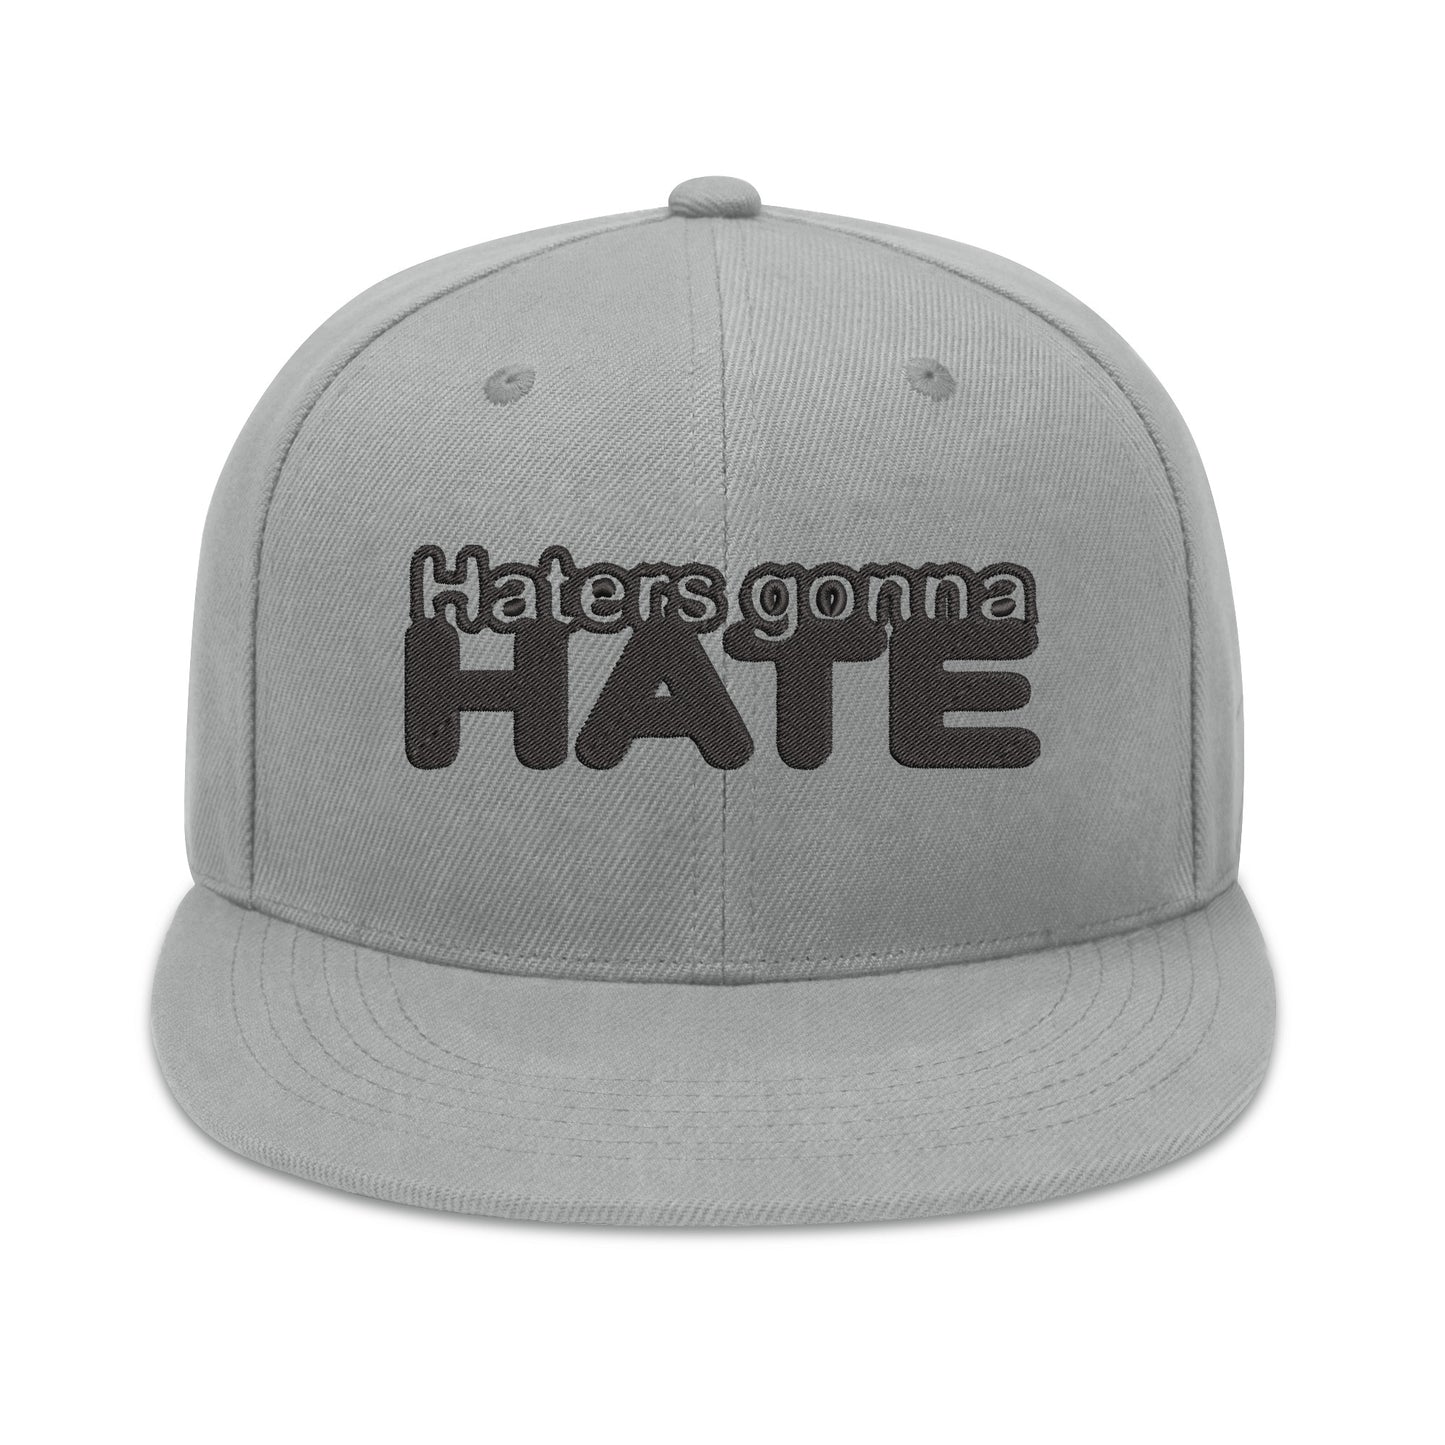 All Over Embroidered Hip-hop Hats